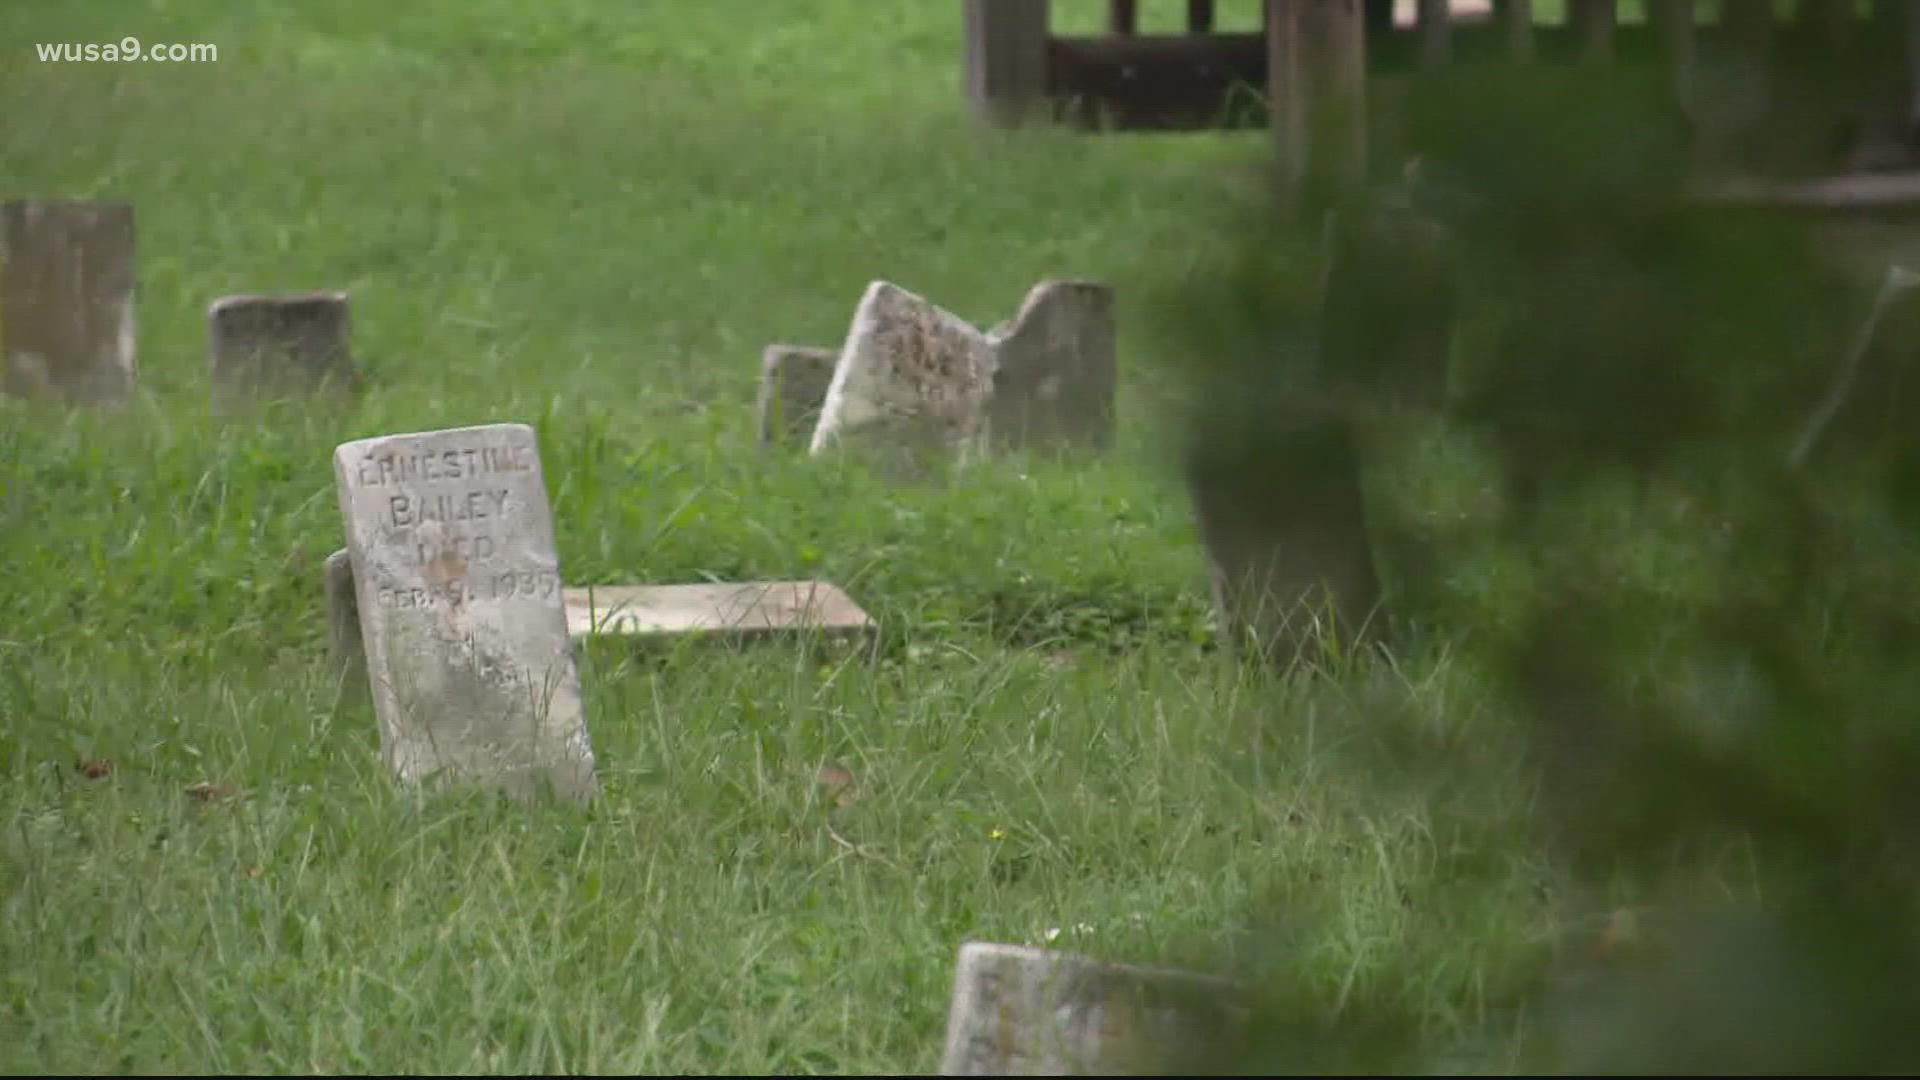 The Douglas Cemetery in Old Town Alexandria is in the flood zone where Ida is heading: neighbors are worried the already swampy gravesites could be further damaged.